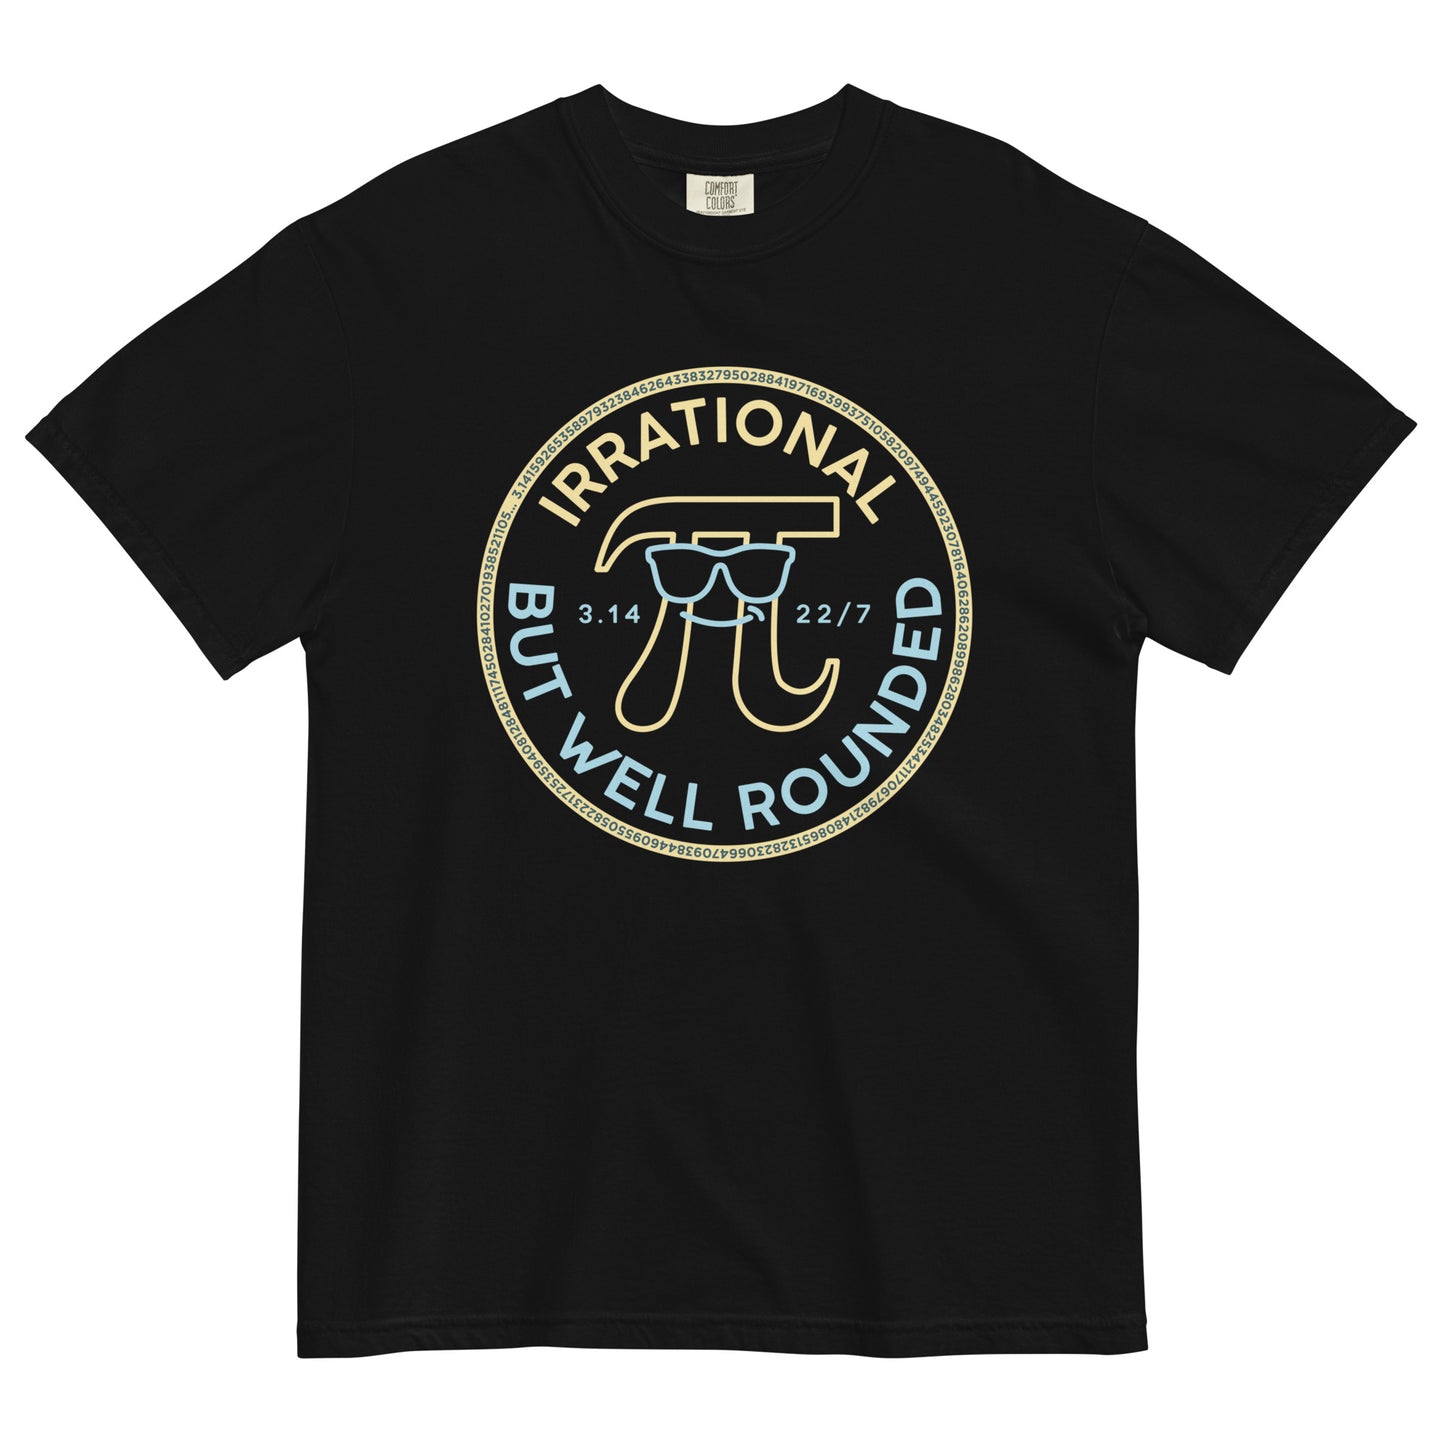 Irrational But Well Rounded Men's Relaxed Fit Tee